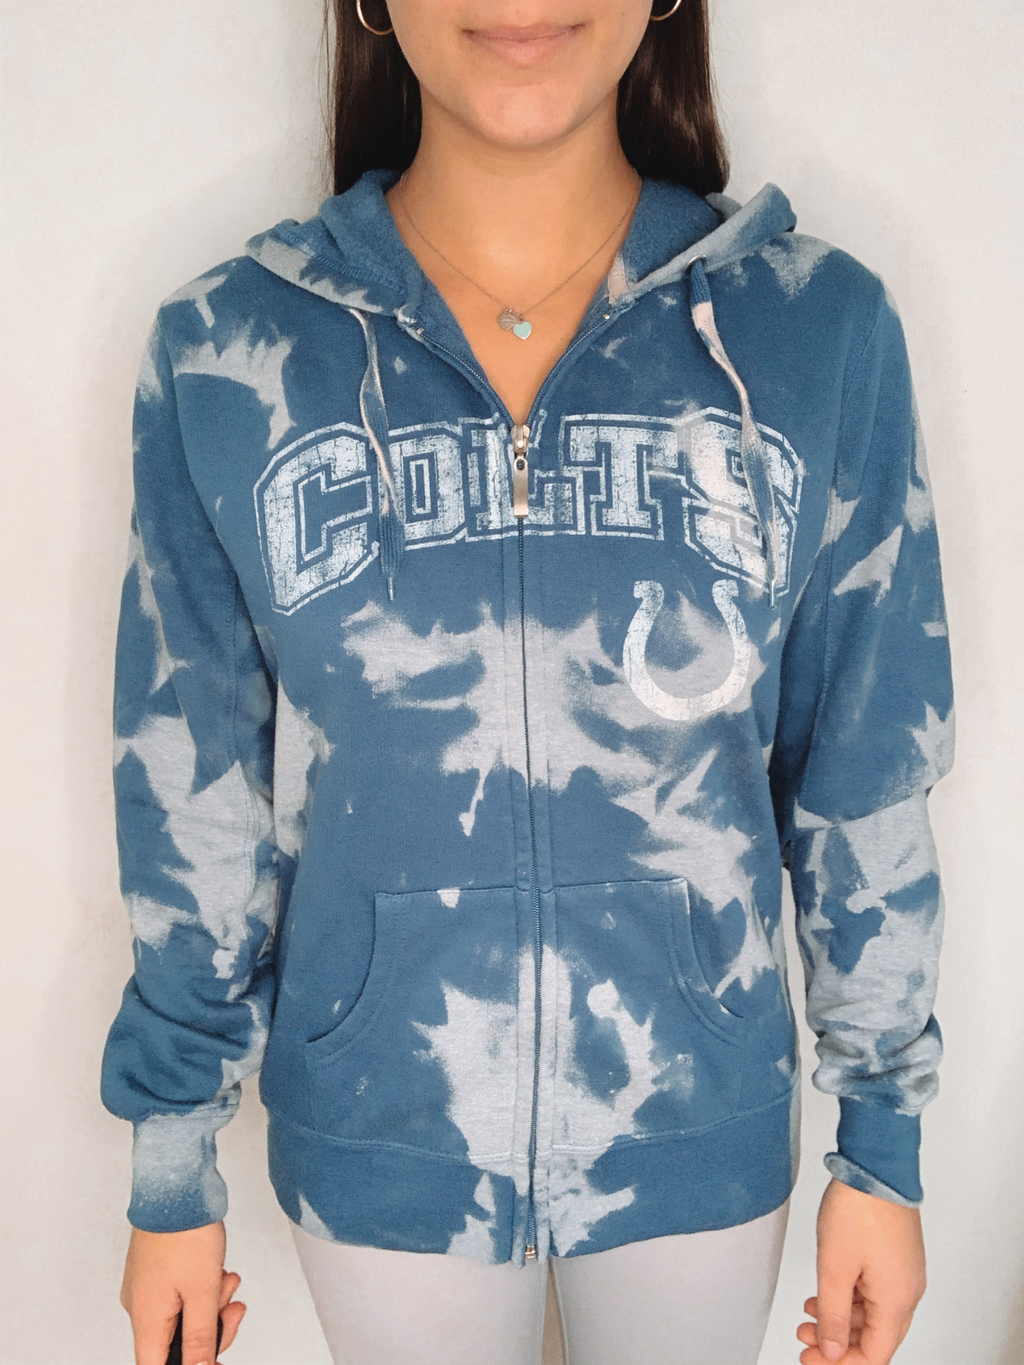 Indianapolis Colts Bleached Zip-Up Sweatshirt